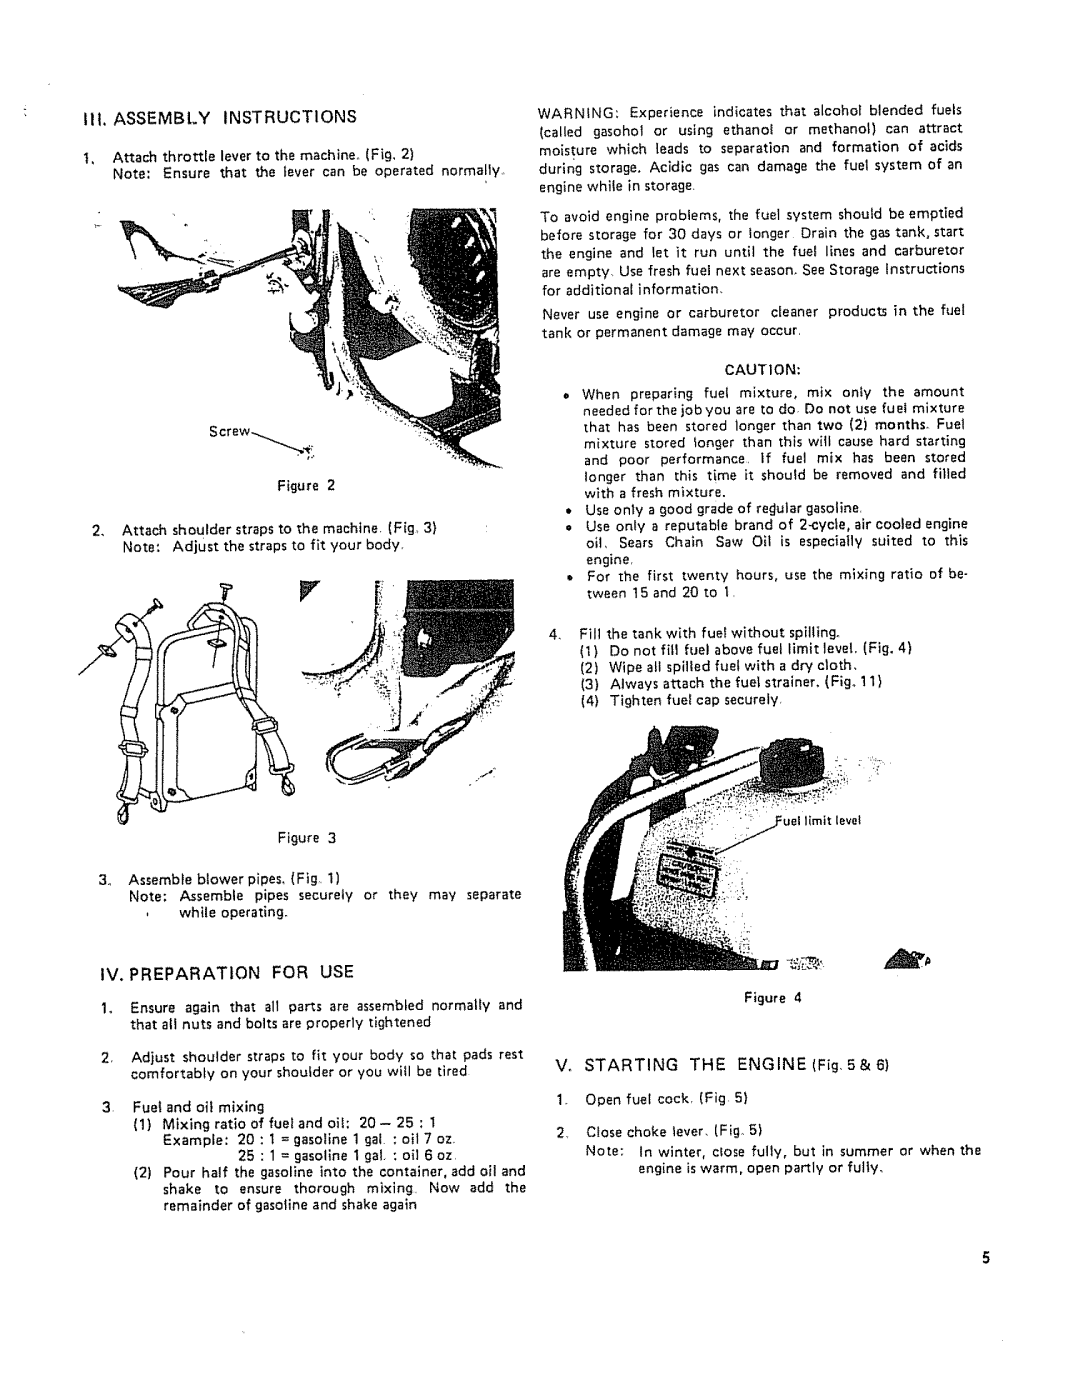 Craftsman 636.796912 owner manual Iii.Assembly Instructions, Iv. Preparation For Use, Vo STARTING THE ENGINEFig 5&6 